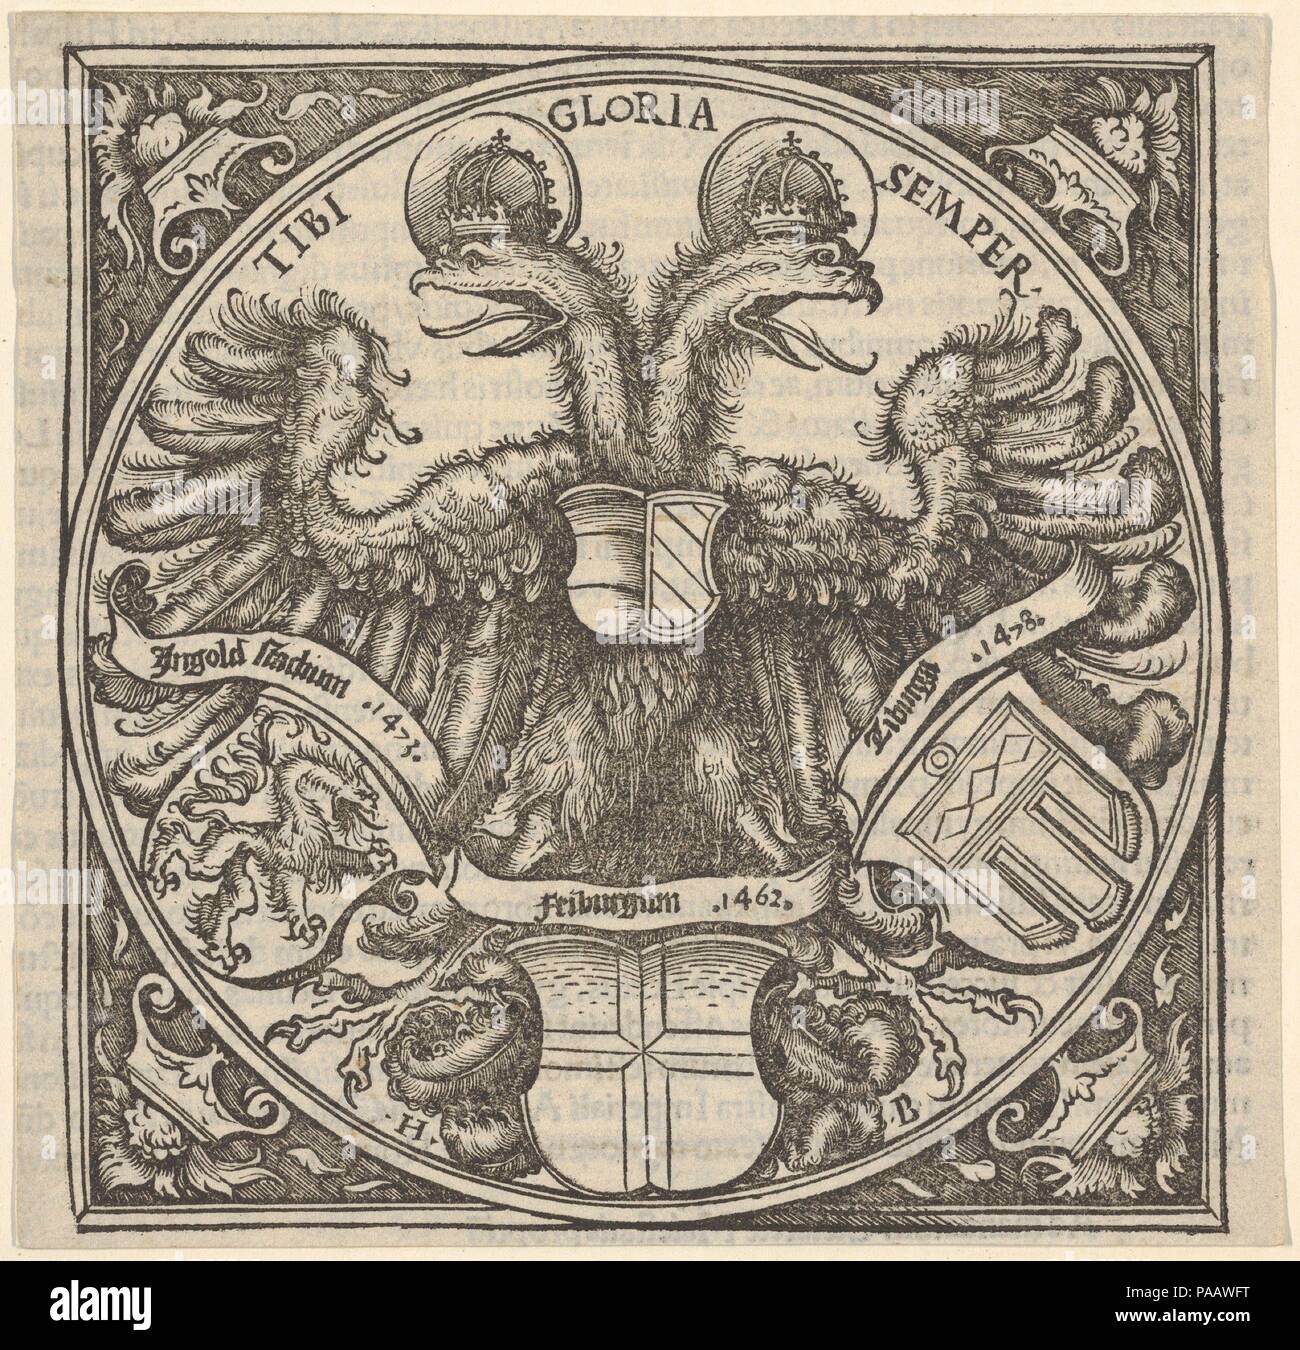 Imperial Double Eagle with the Coat of Arms of Ingolstadt, Freiburg, and Tübingen, from Joan. Eckii Theologi in summulas Petri Hispani extemporaria et succincta atque succosa explanatio p[ro] sup[er] ioris Germaniae scholasticis. Artist: Hans Burgkmair (German, Augsburg 1473-1531 Augsburg). Author: Johann von Eck (1486-1543). Dimensions: Sheet: 5 5/16 × 5 7/16 in. (13.5 × 13.8 cm)  Plate: 5 1/8 × 5 1/16 in. (13 × 12.8 cm). Publisher: Johann Miller (active Augsburg ca. 1512-28). Date: 1516.  Double-headed eagle with three coat of arms below for the university-towns of Ingolstadt, Feiburg, and T Stock Photo